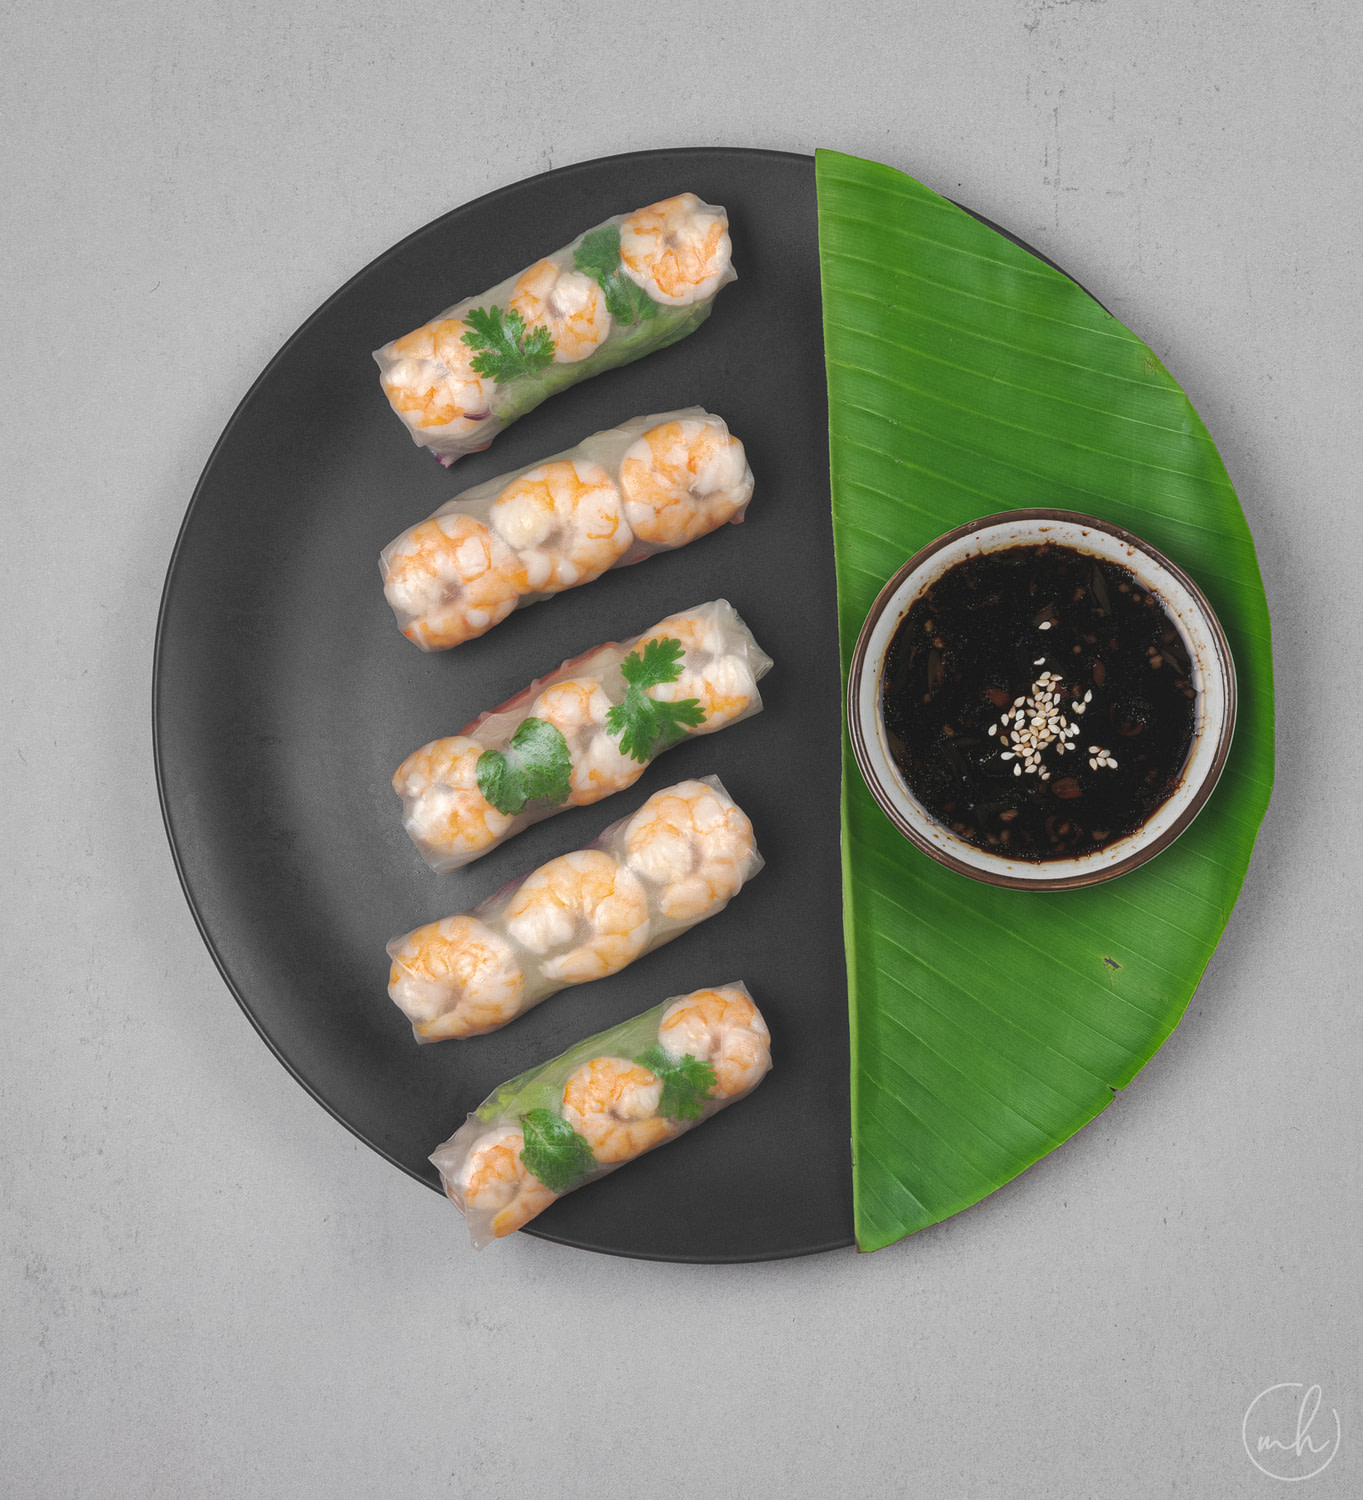 Shrimp summer roll placed on a black plate next to a banana leaf with a soy dipping sauce